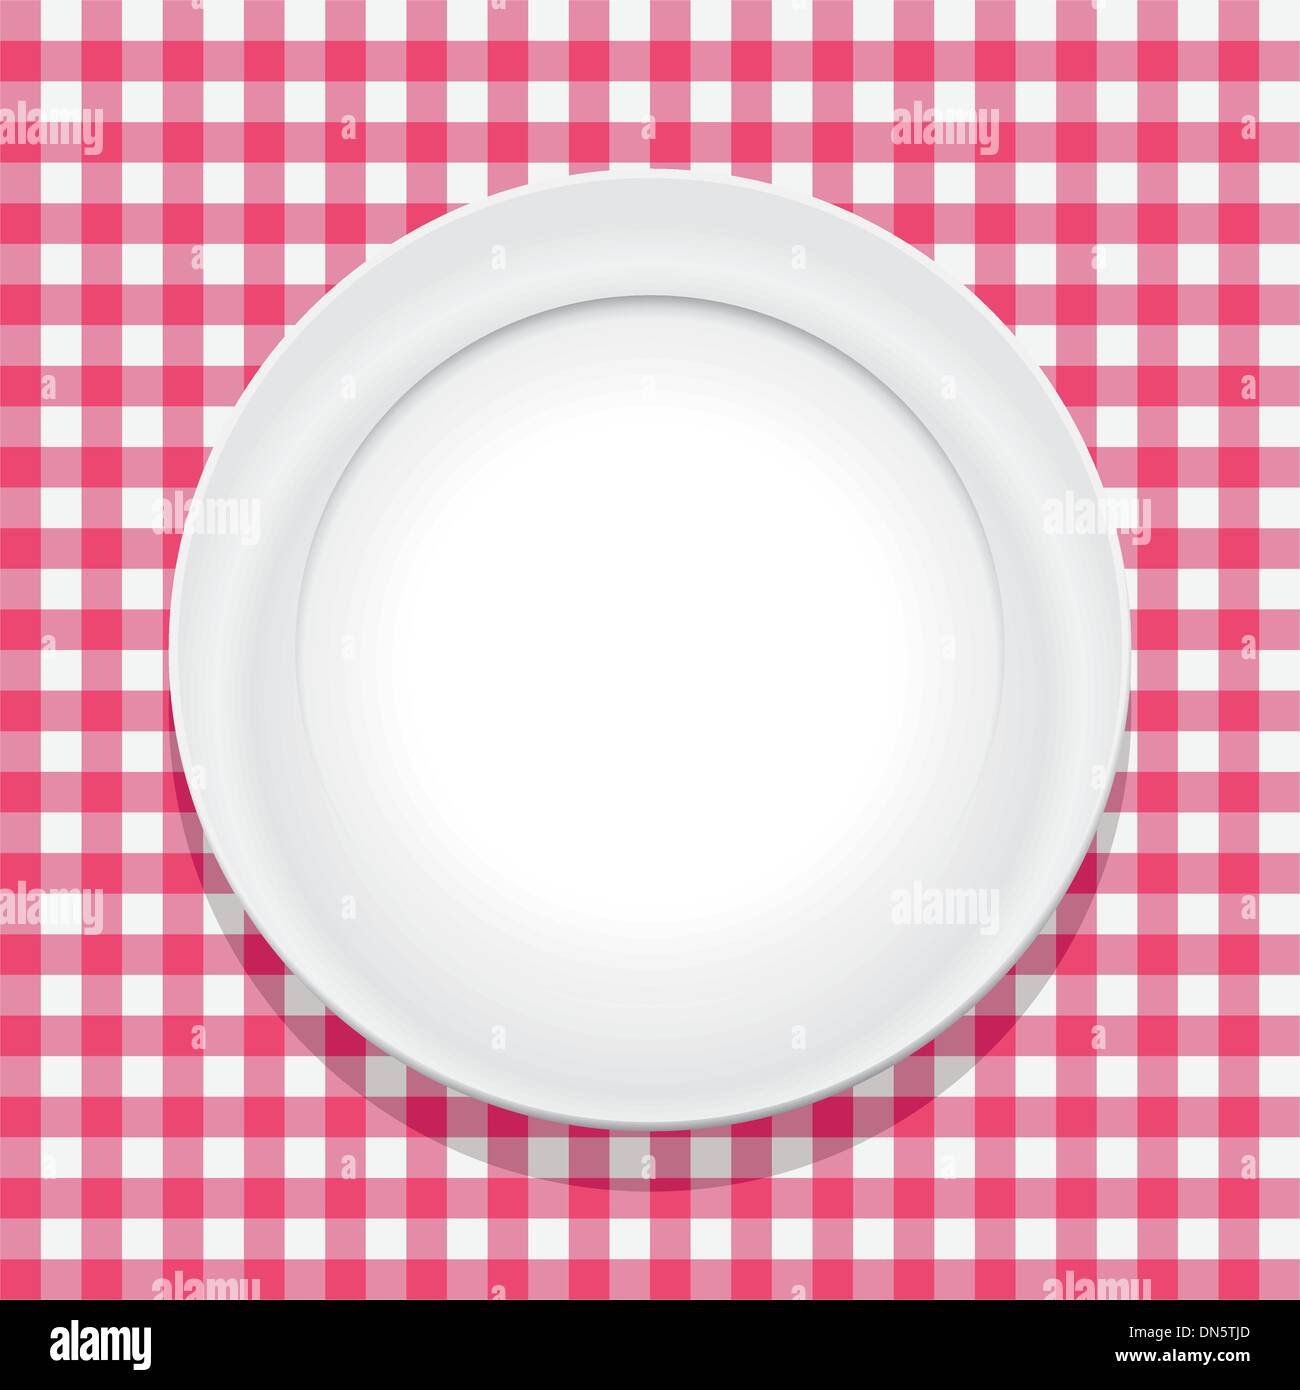 vector tablecloth and empty plate Stock Vector